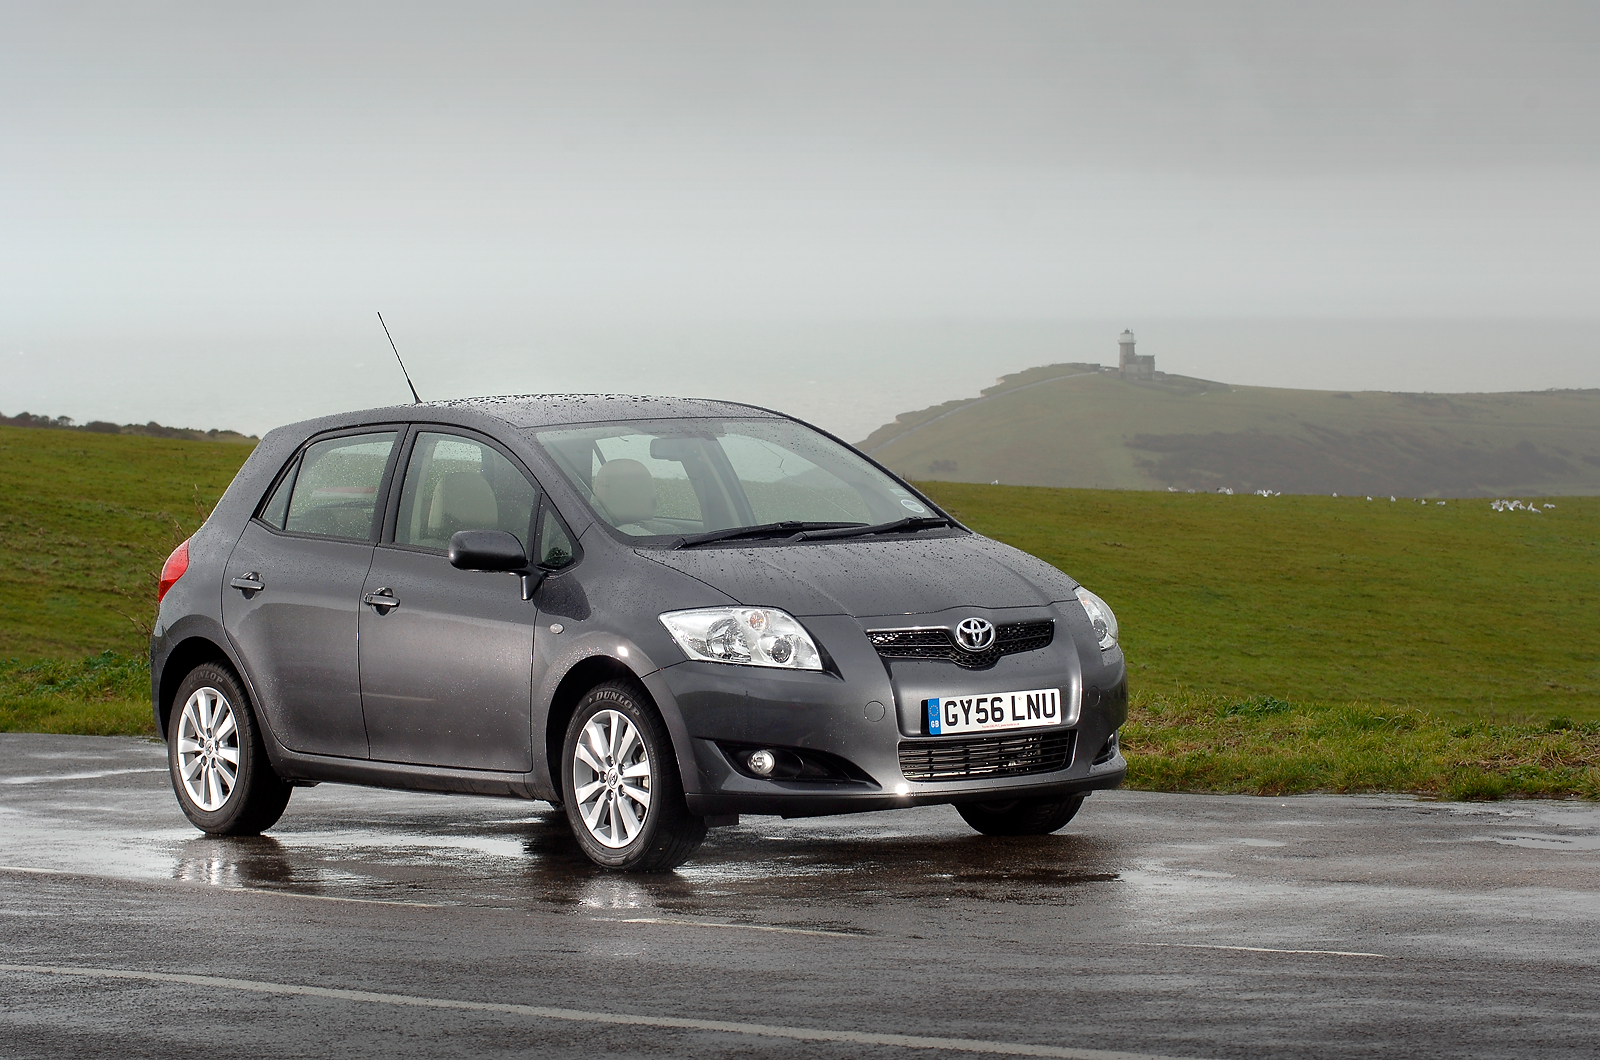 Toyota Auris hatchback review 2007 - 2012 -- CarBuyer 